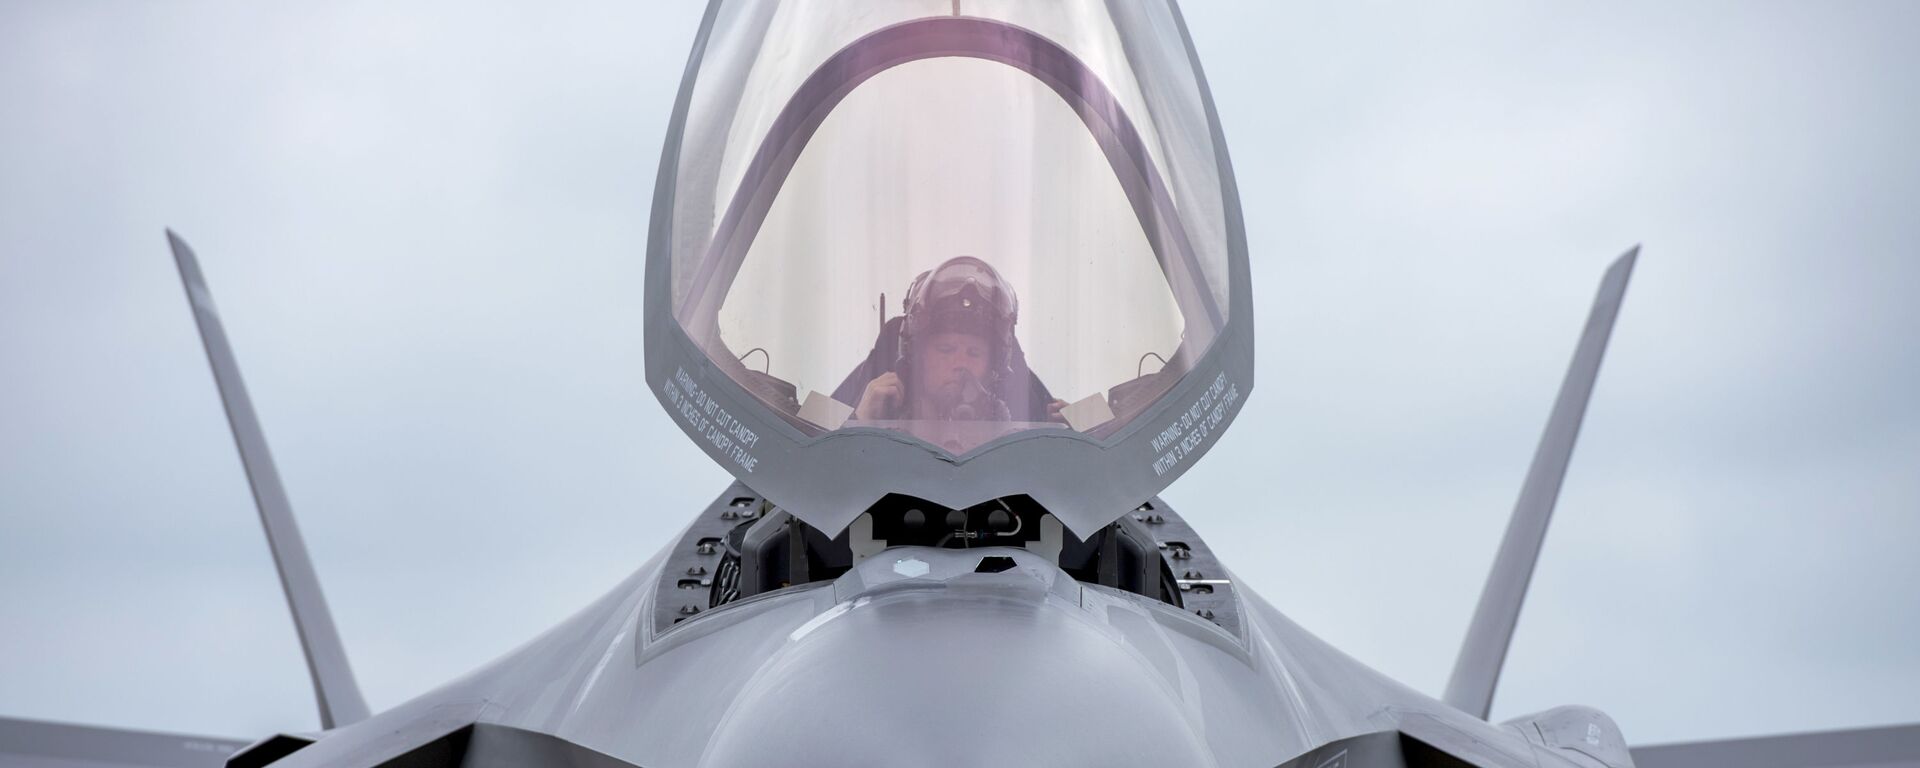 Maj. Will Andreotta, F-35 Lightning II Heritage Flight Team pilot from Luke Air Force Base, Az., prepares to exit the cockpit at Joint Base Andrews, Md., Sept. 20, 2016. The aircraft is here to perform a fly-over during the U.S. Air Force Tattoo at Joint Base Anacostia-Bolling, Washington, D.C., Sept. 22, 2016.  - Sputnik International, 1920, 31.03.2023